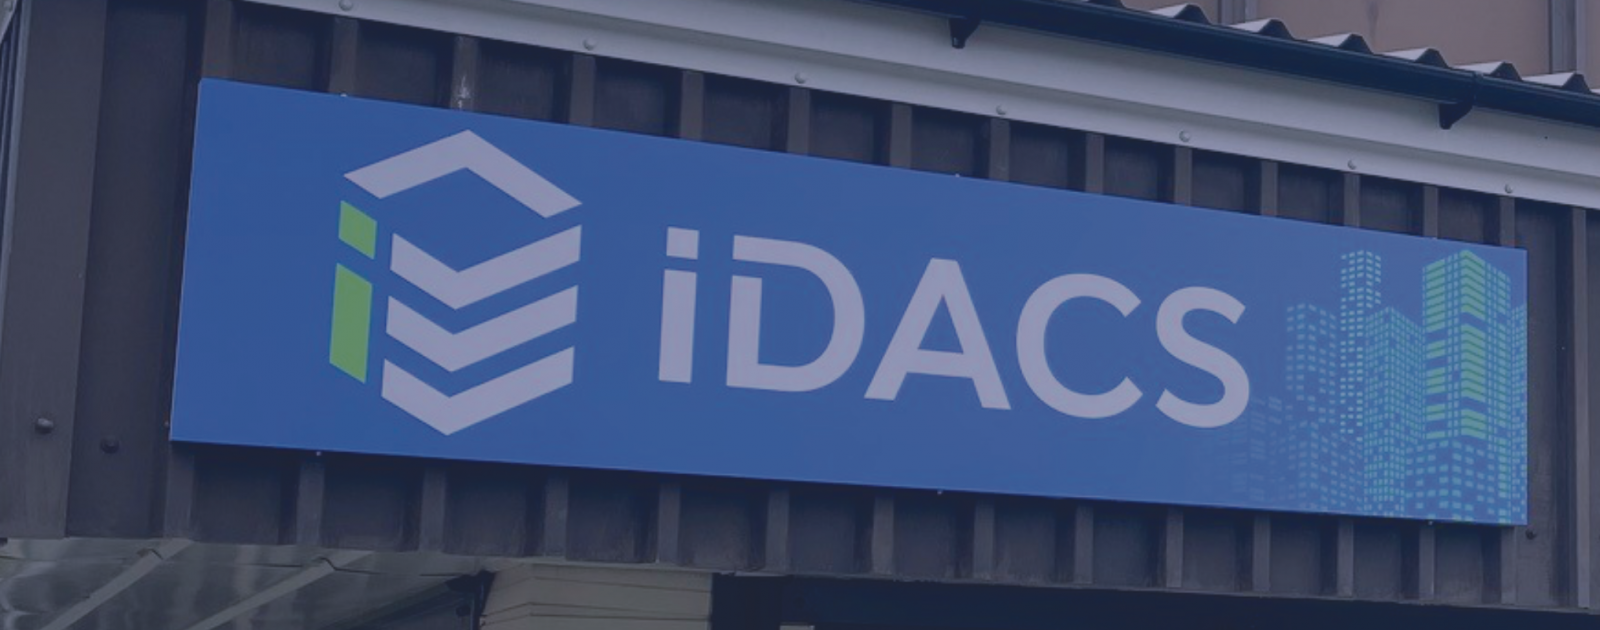 iDACS News and events, industry trends and product features